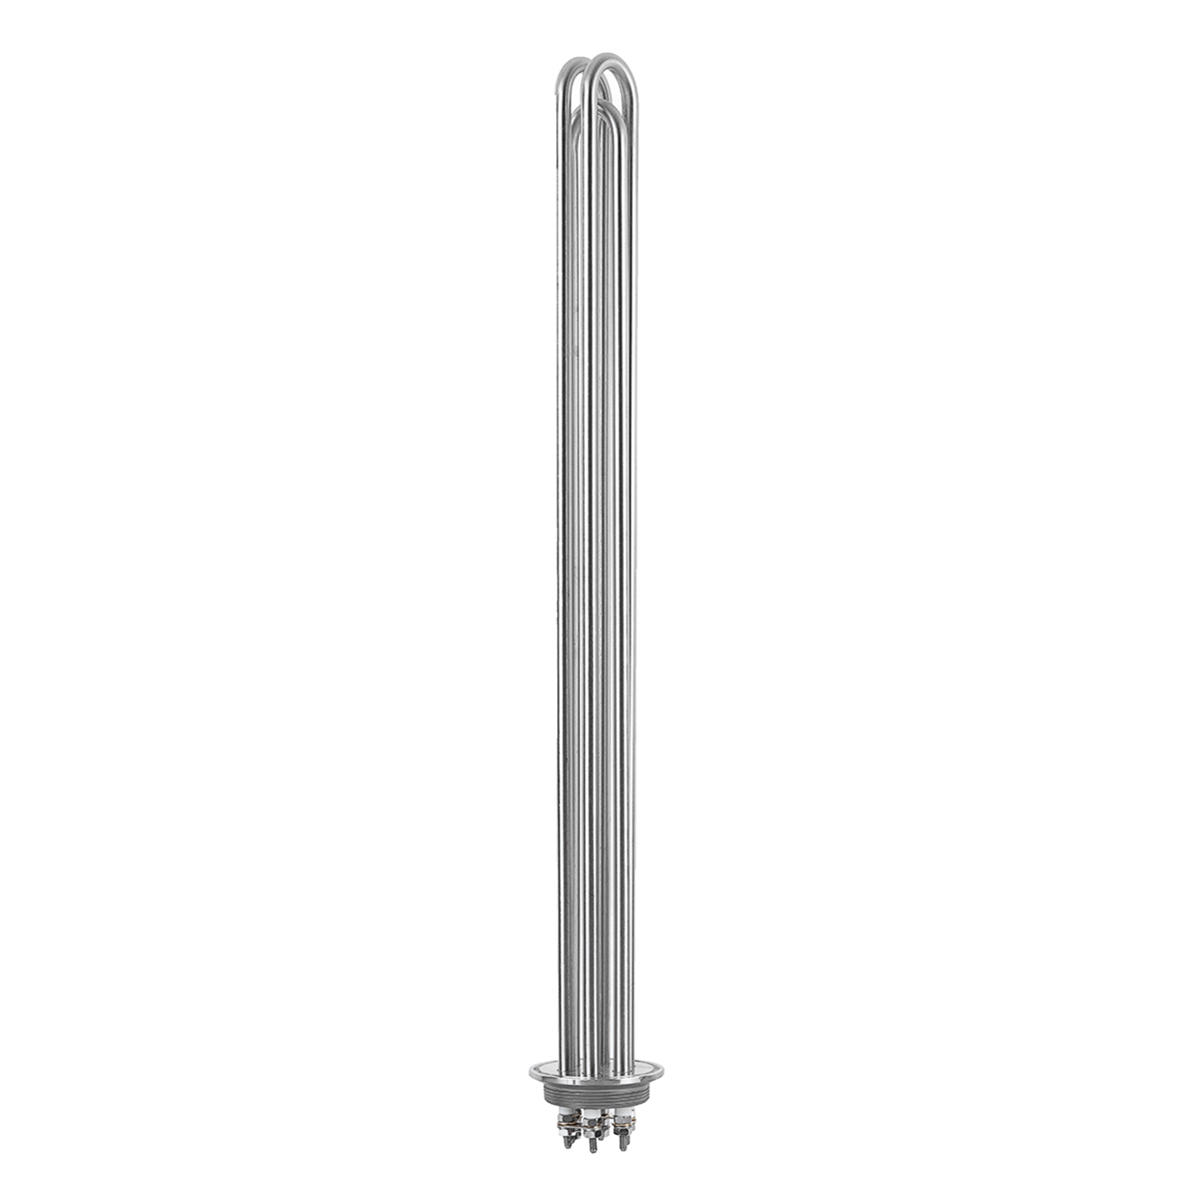 Image of Brewing Heating Element Boiler Immersion Heater DN50 Stainless Steel Wine Maker Tools